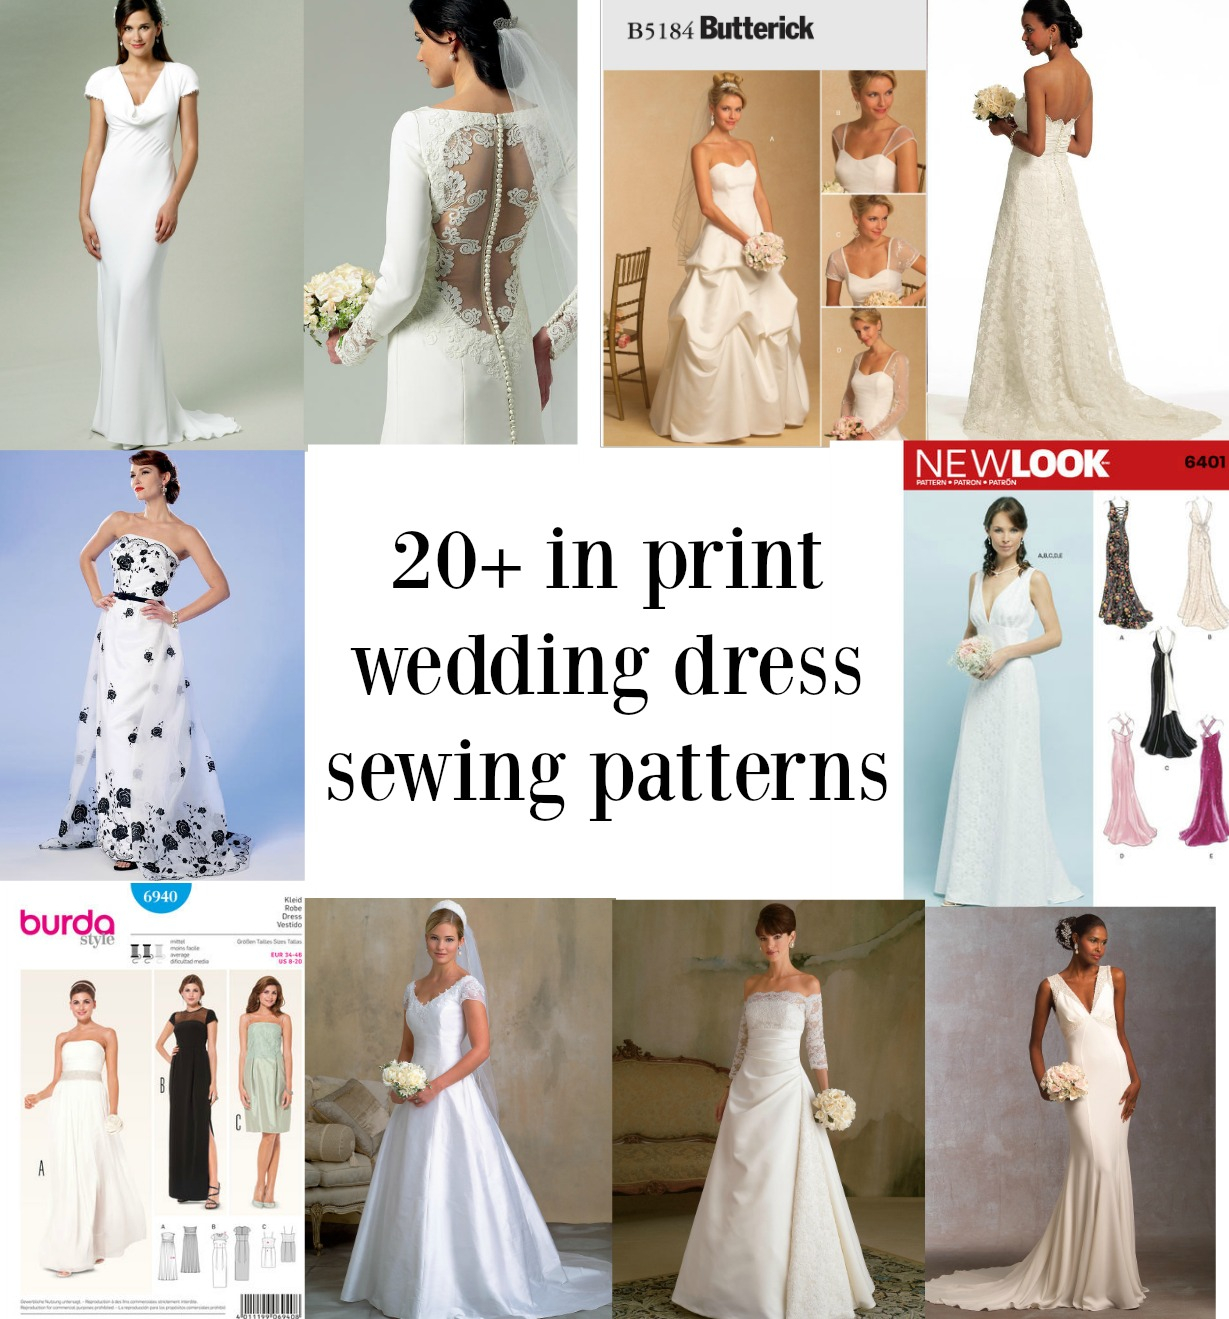 Wedding Dress Sewing Pattern Links To Over Twenty In Print Bridal Gown Sewing Patterns